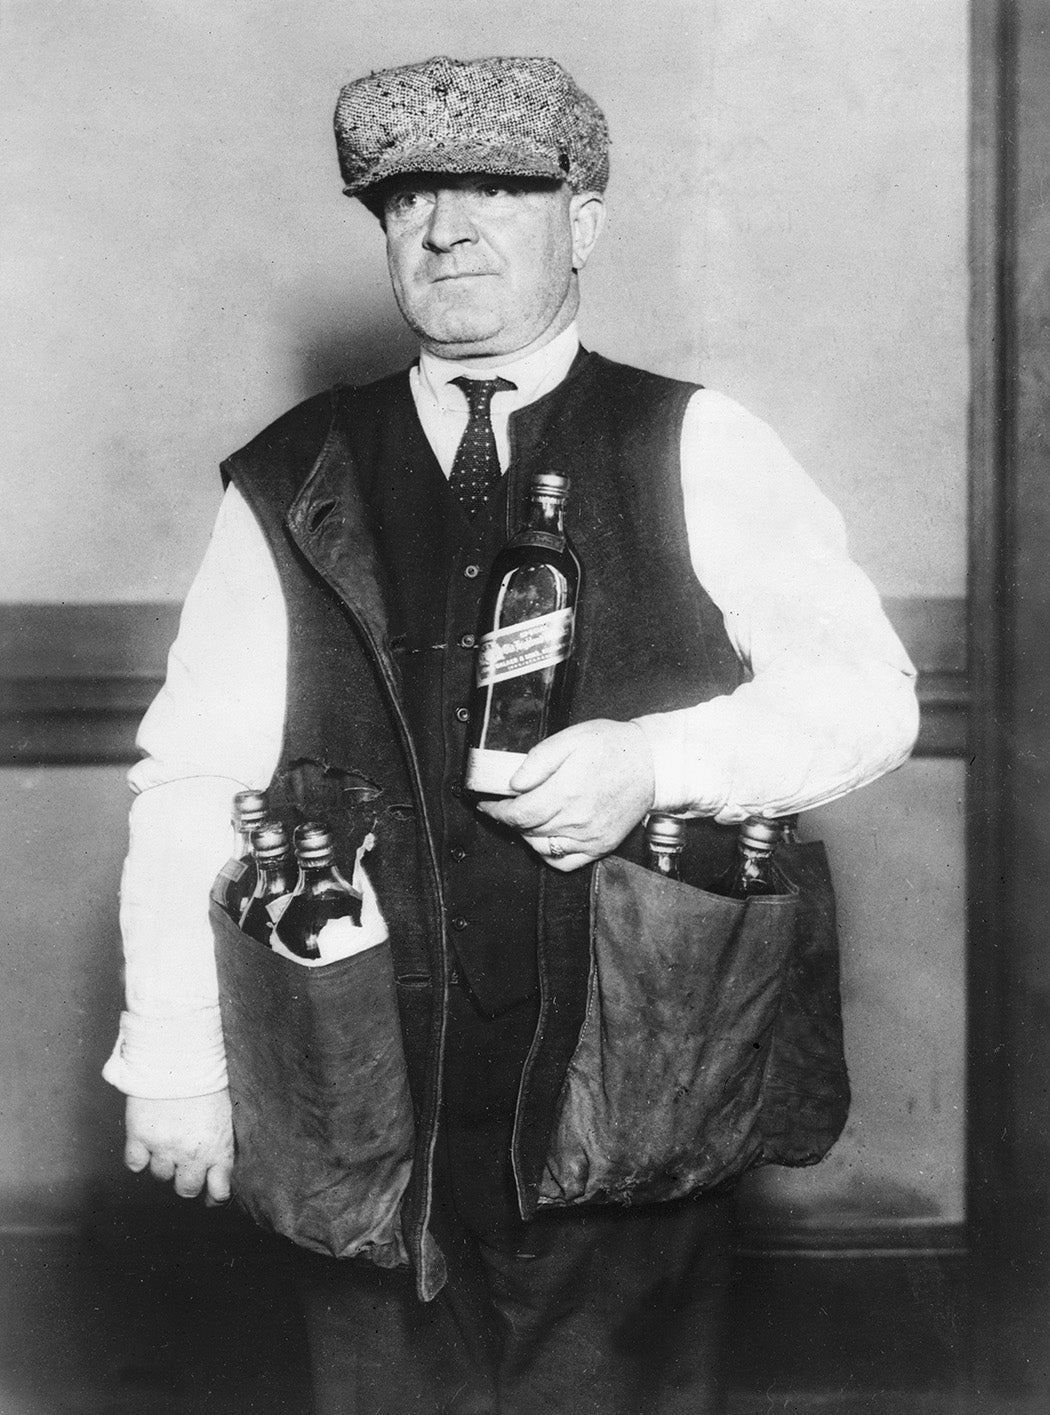 A revenue agent wearing a waistcoat designed to hide whisky during the prohibition era in America, 1923